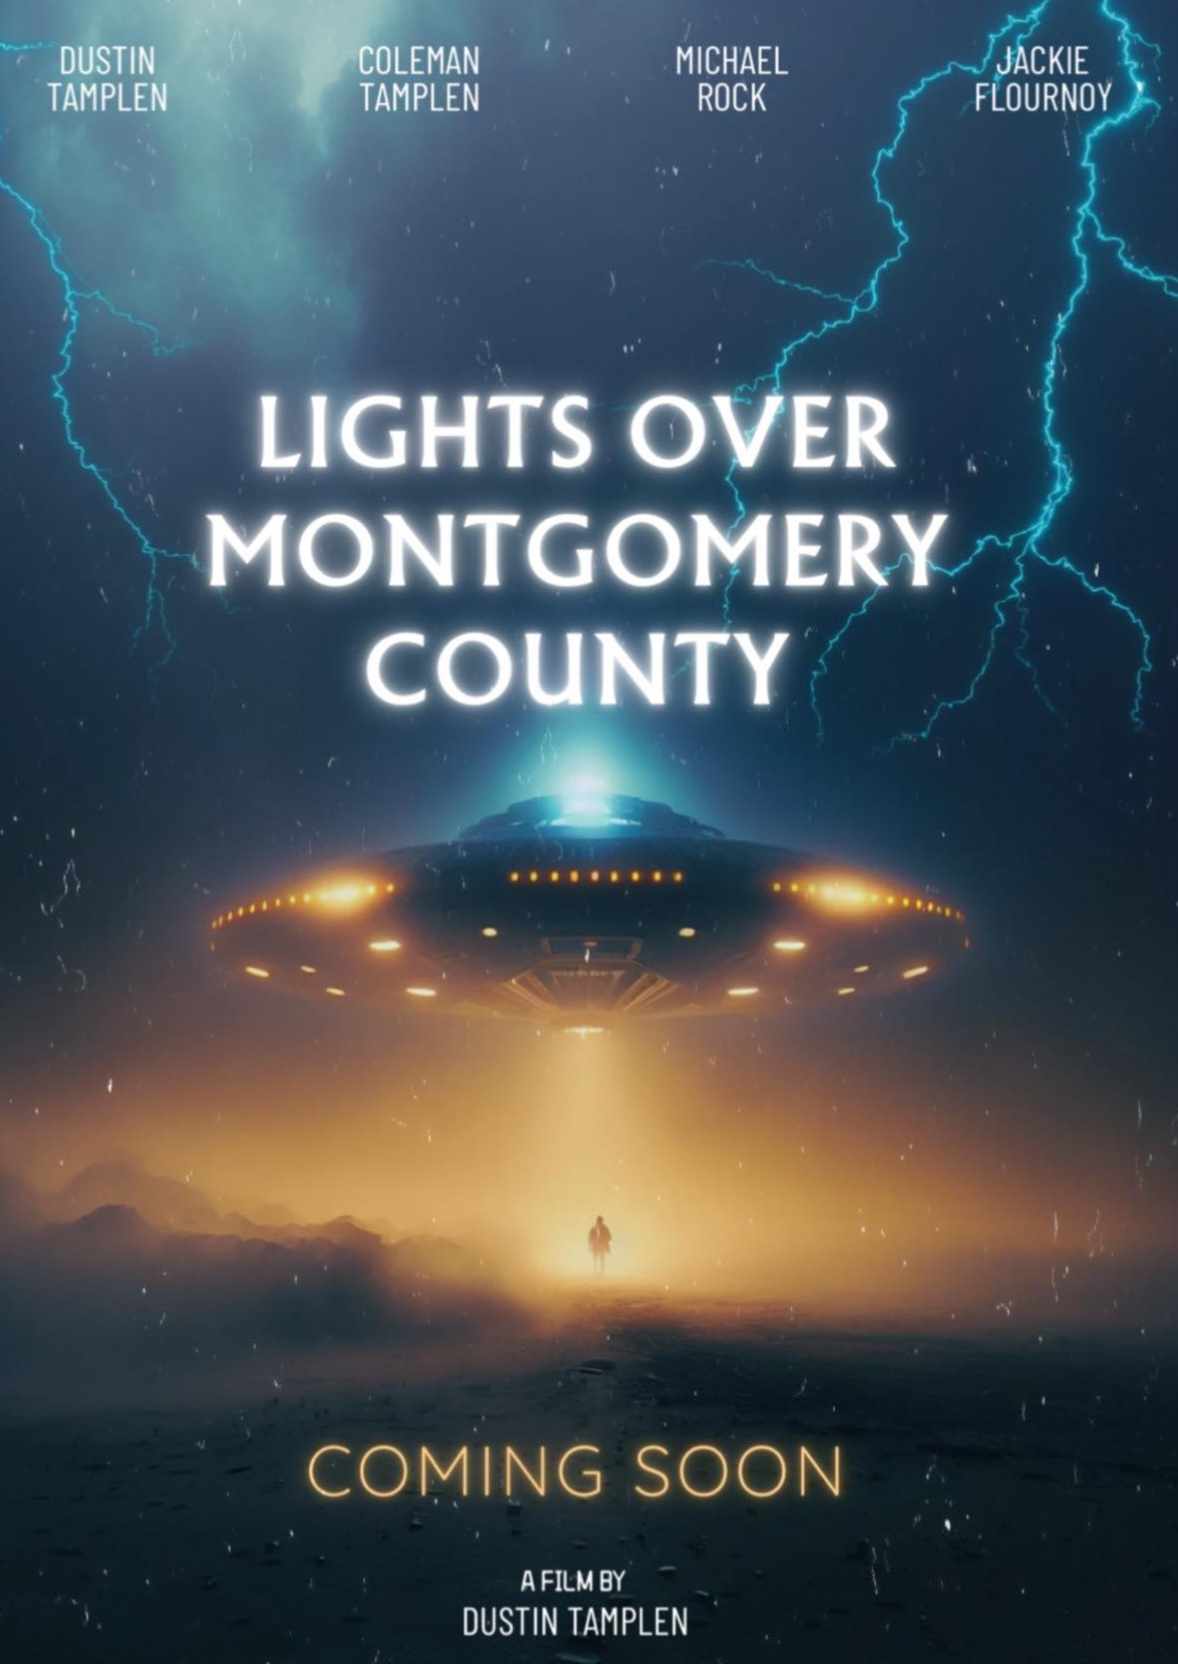 First ScarePlex Original Film ”Lights Over Montgomery County” to release October 13th from Horror Dadz Productions